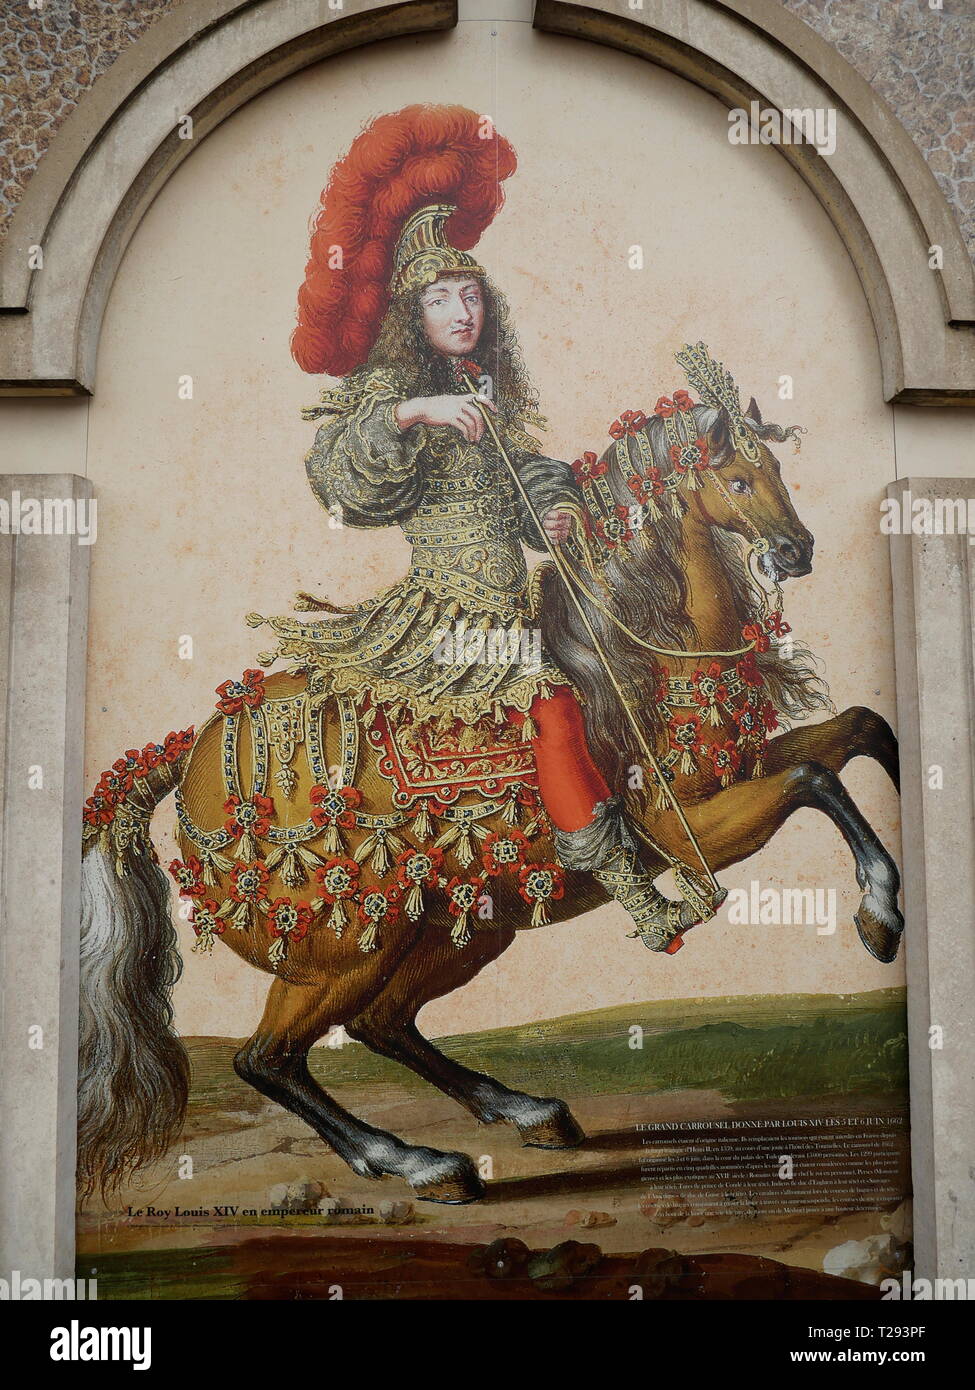 AJAXNETPHOTO. VERSAILLES, FRANCE. - IMAGE OF KING LOUIS XIV ON CAR PARK ENTRANCE IN THE MARKET SQUARE. PHOTO:JONATHAN EASTLAND/AJAX REF:GX181909 430 Stock Photo